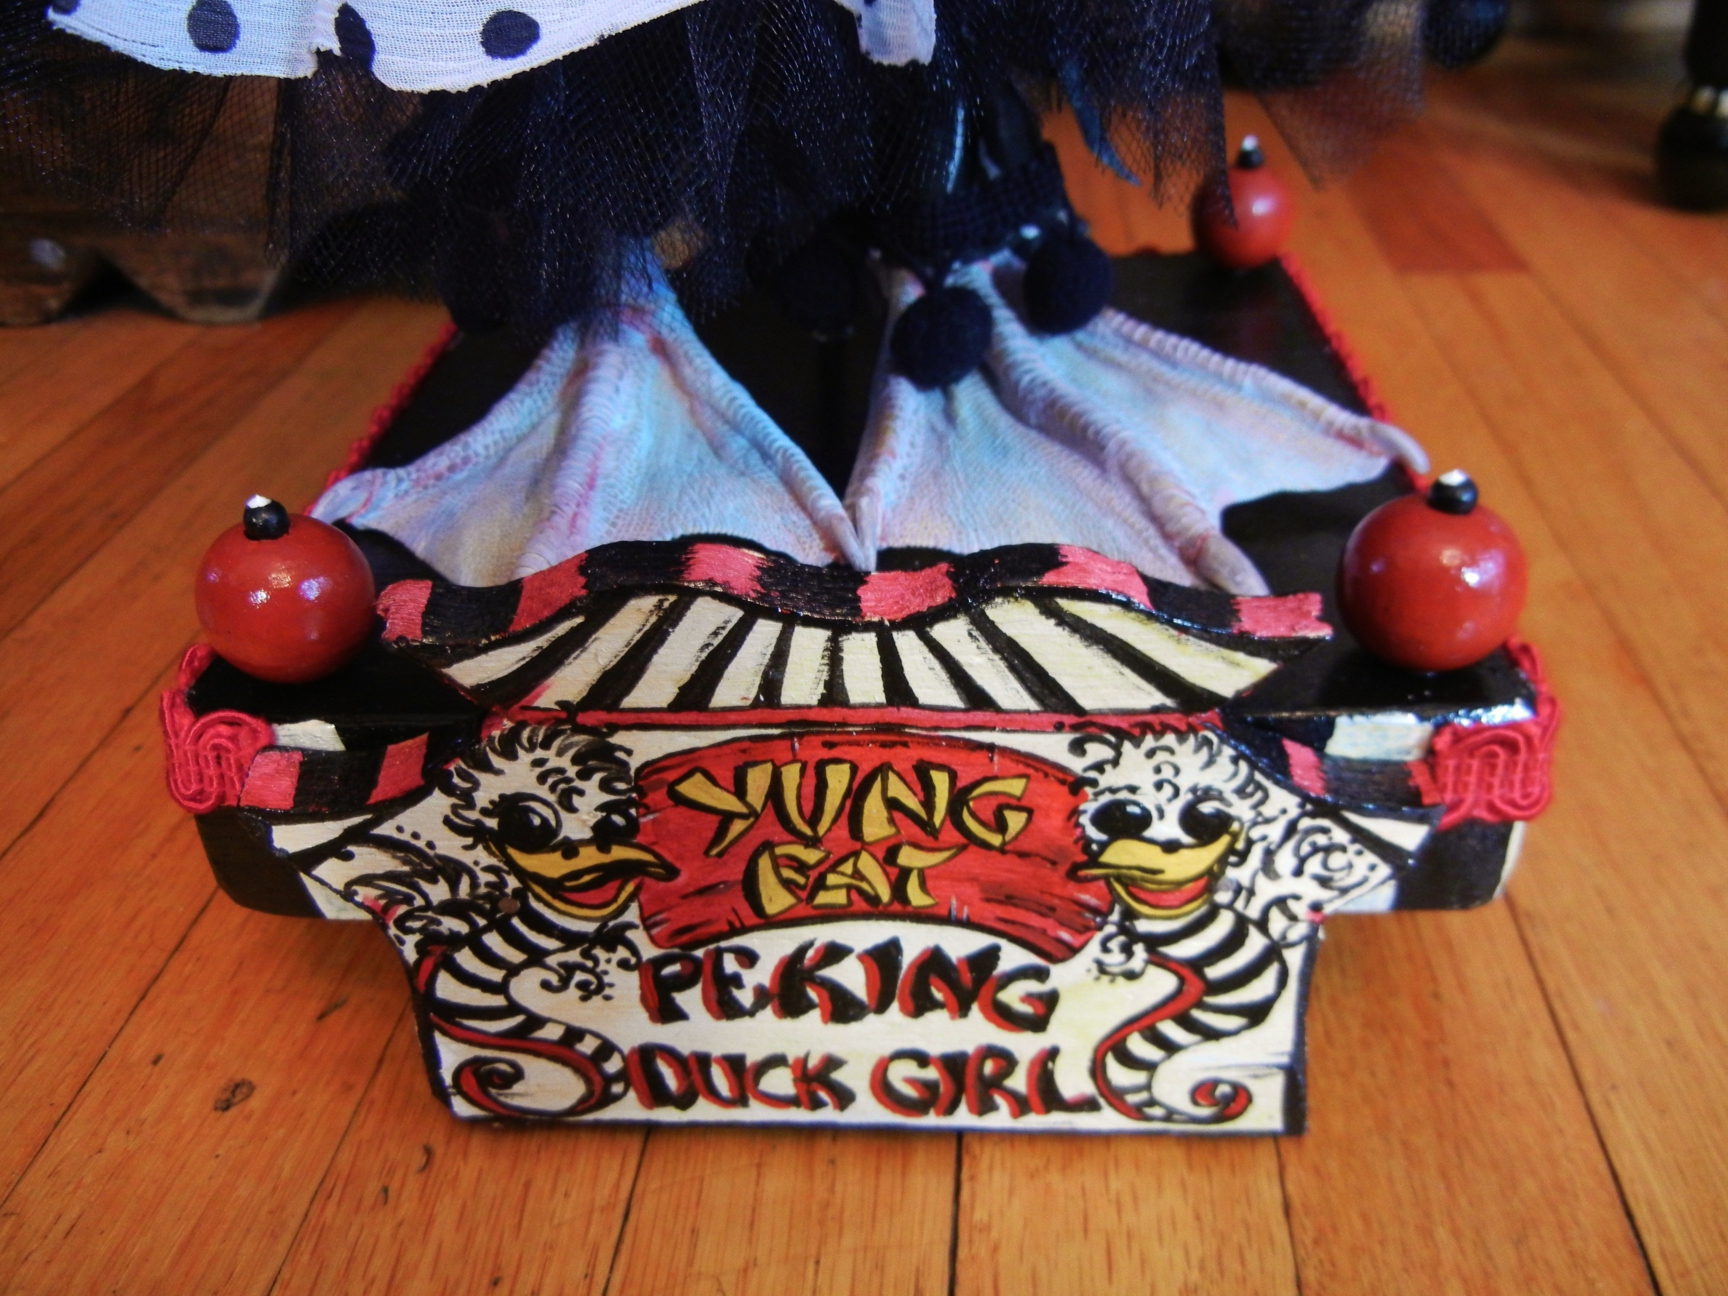 taxidermy webbed duck feet stand on hand-painted wooden platform hand-lettered circus sign reads Yung Fat Peking Duck Girl